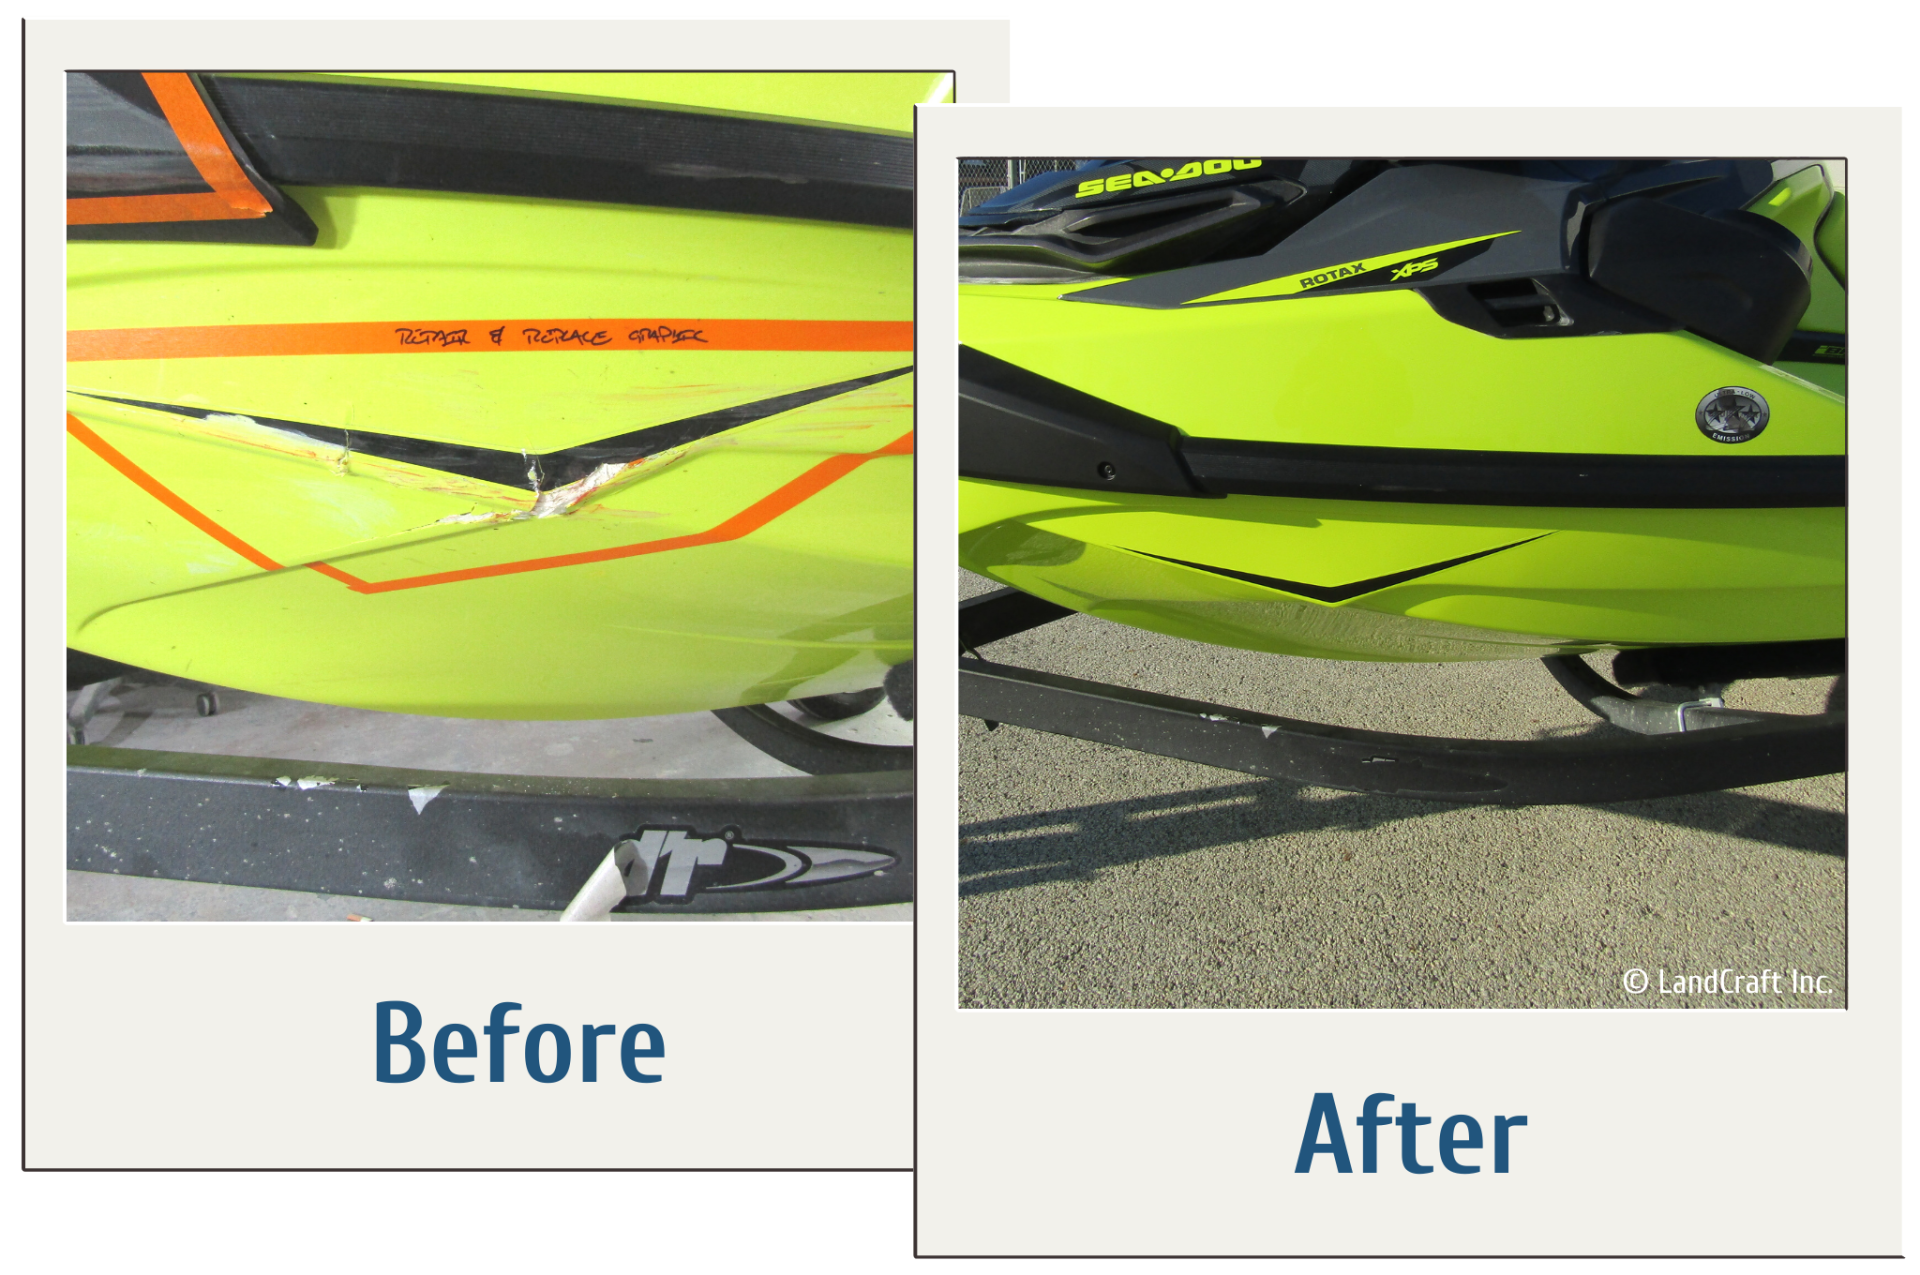 Before and after of a jet ski structural repair